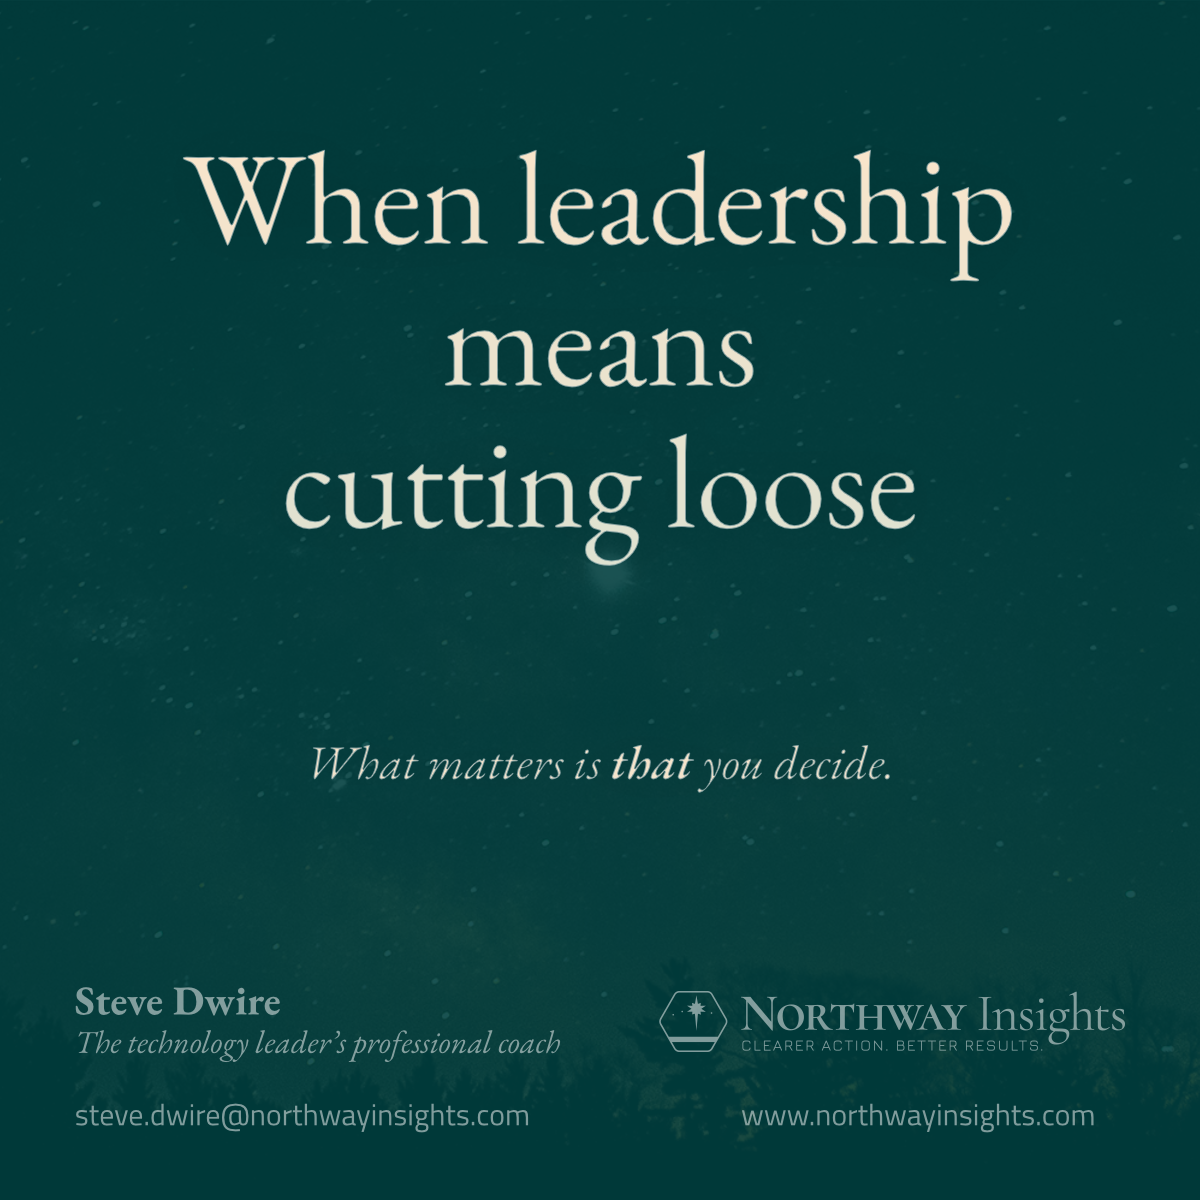 When leadership means cutting loose (What matters is THAT you decide.)